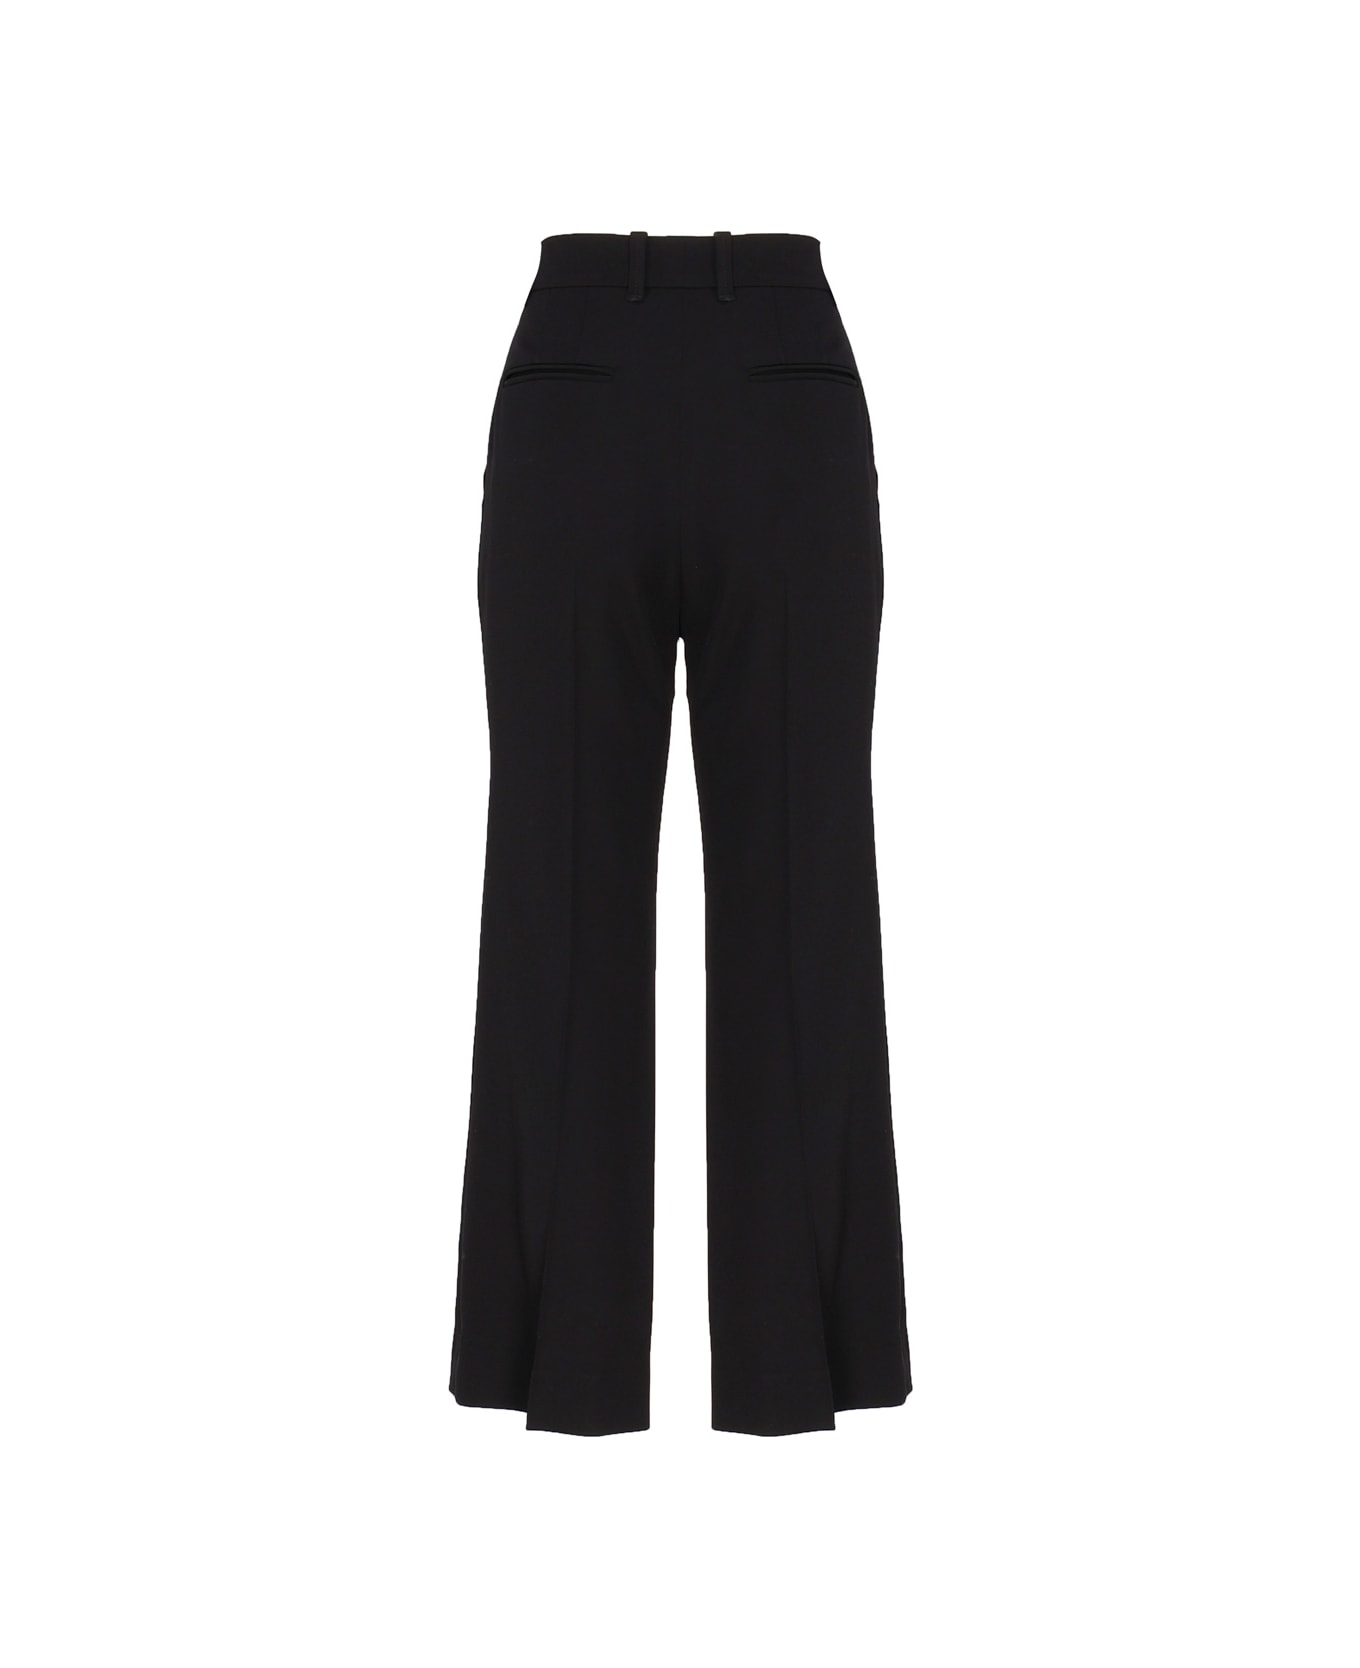 Chloé Tailored Trousers - Black ボトムス